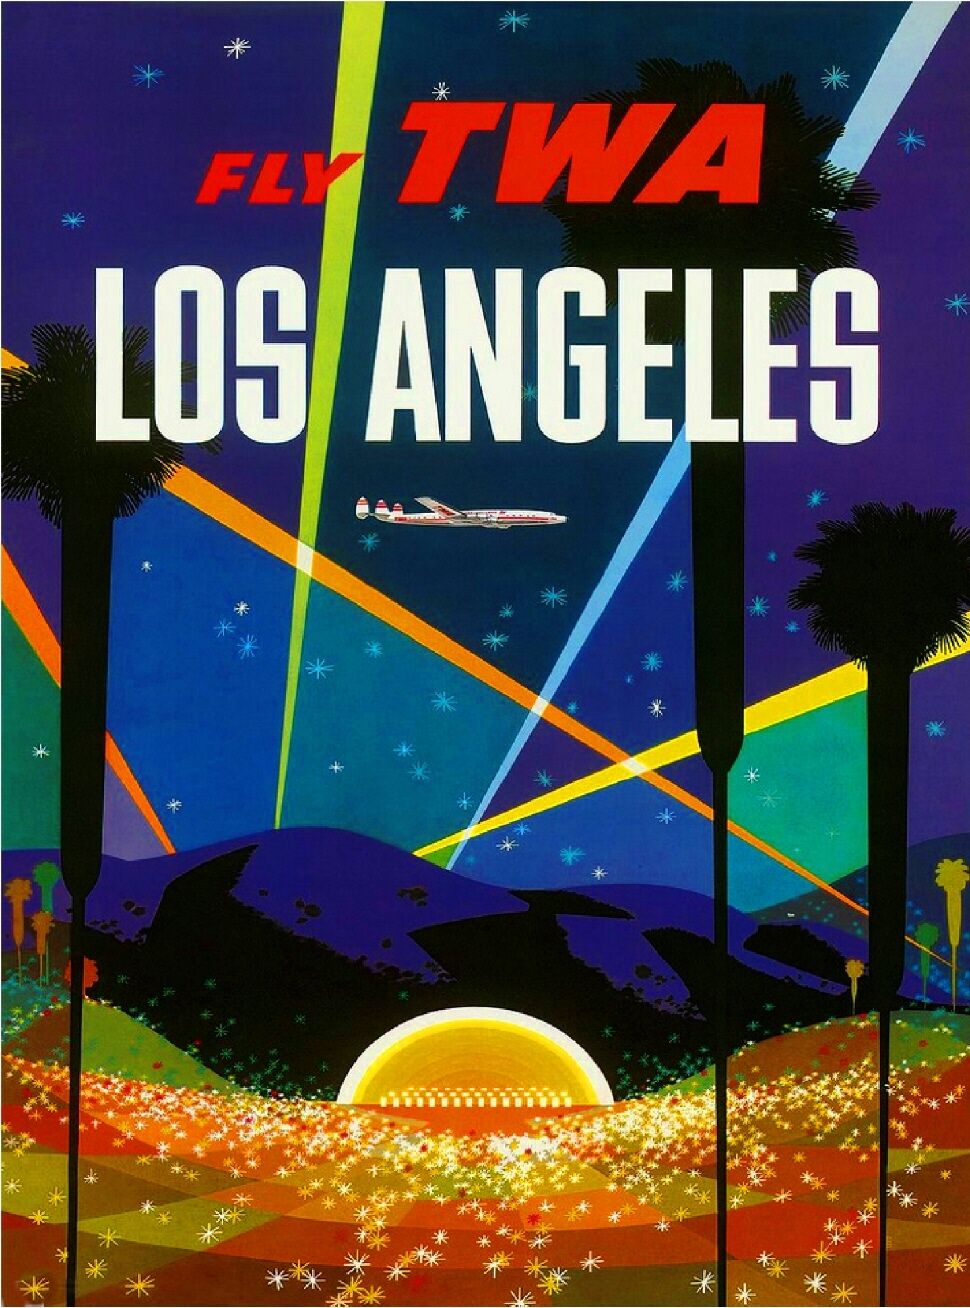 Los Angeles California Hollywood Bowl United States Travel Advertisement Poster 